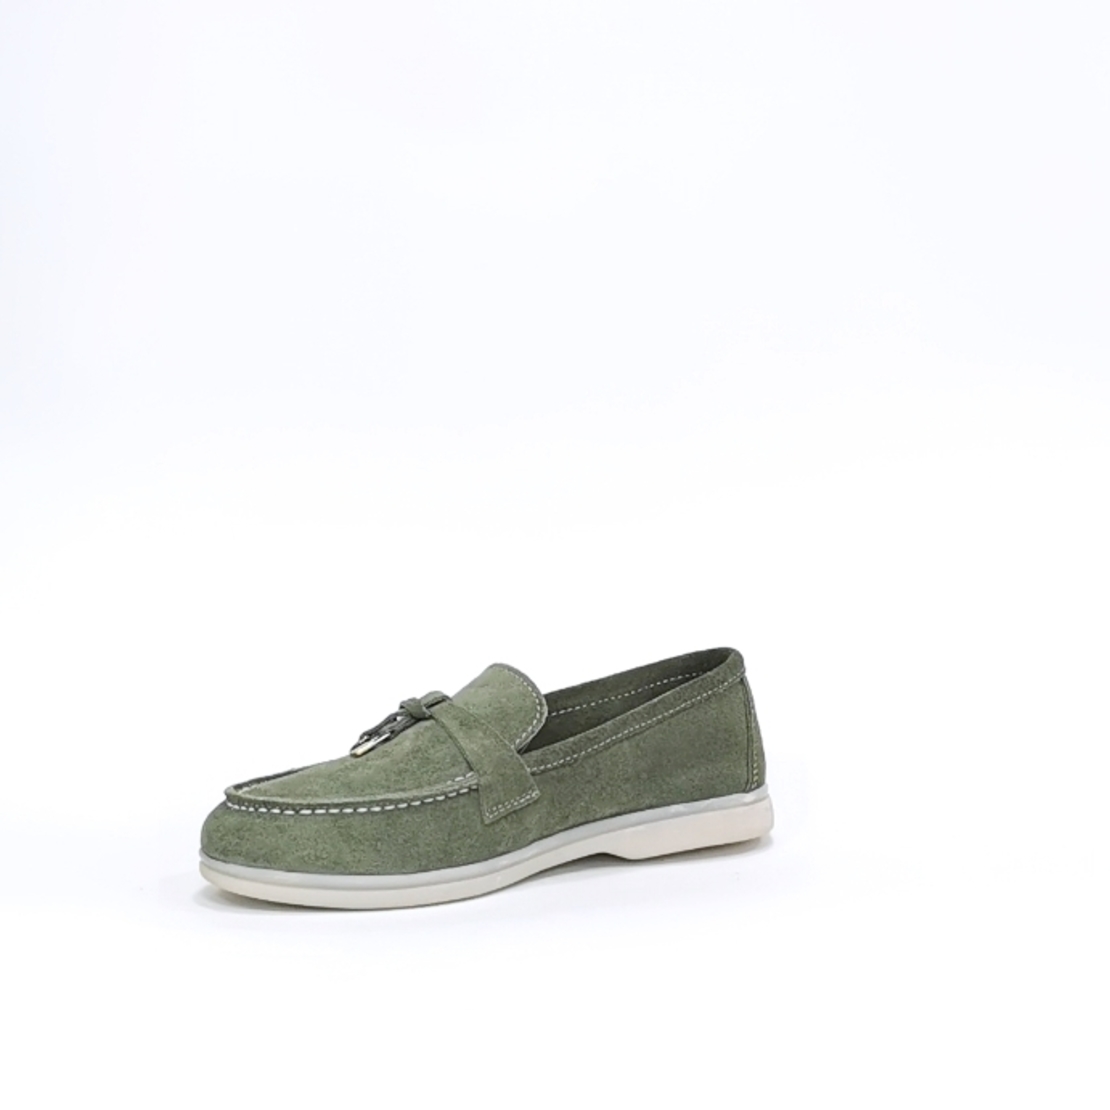 Women's moccasins / loafers / made of natural leather in the color green/7750